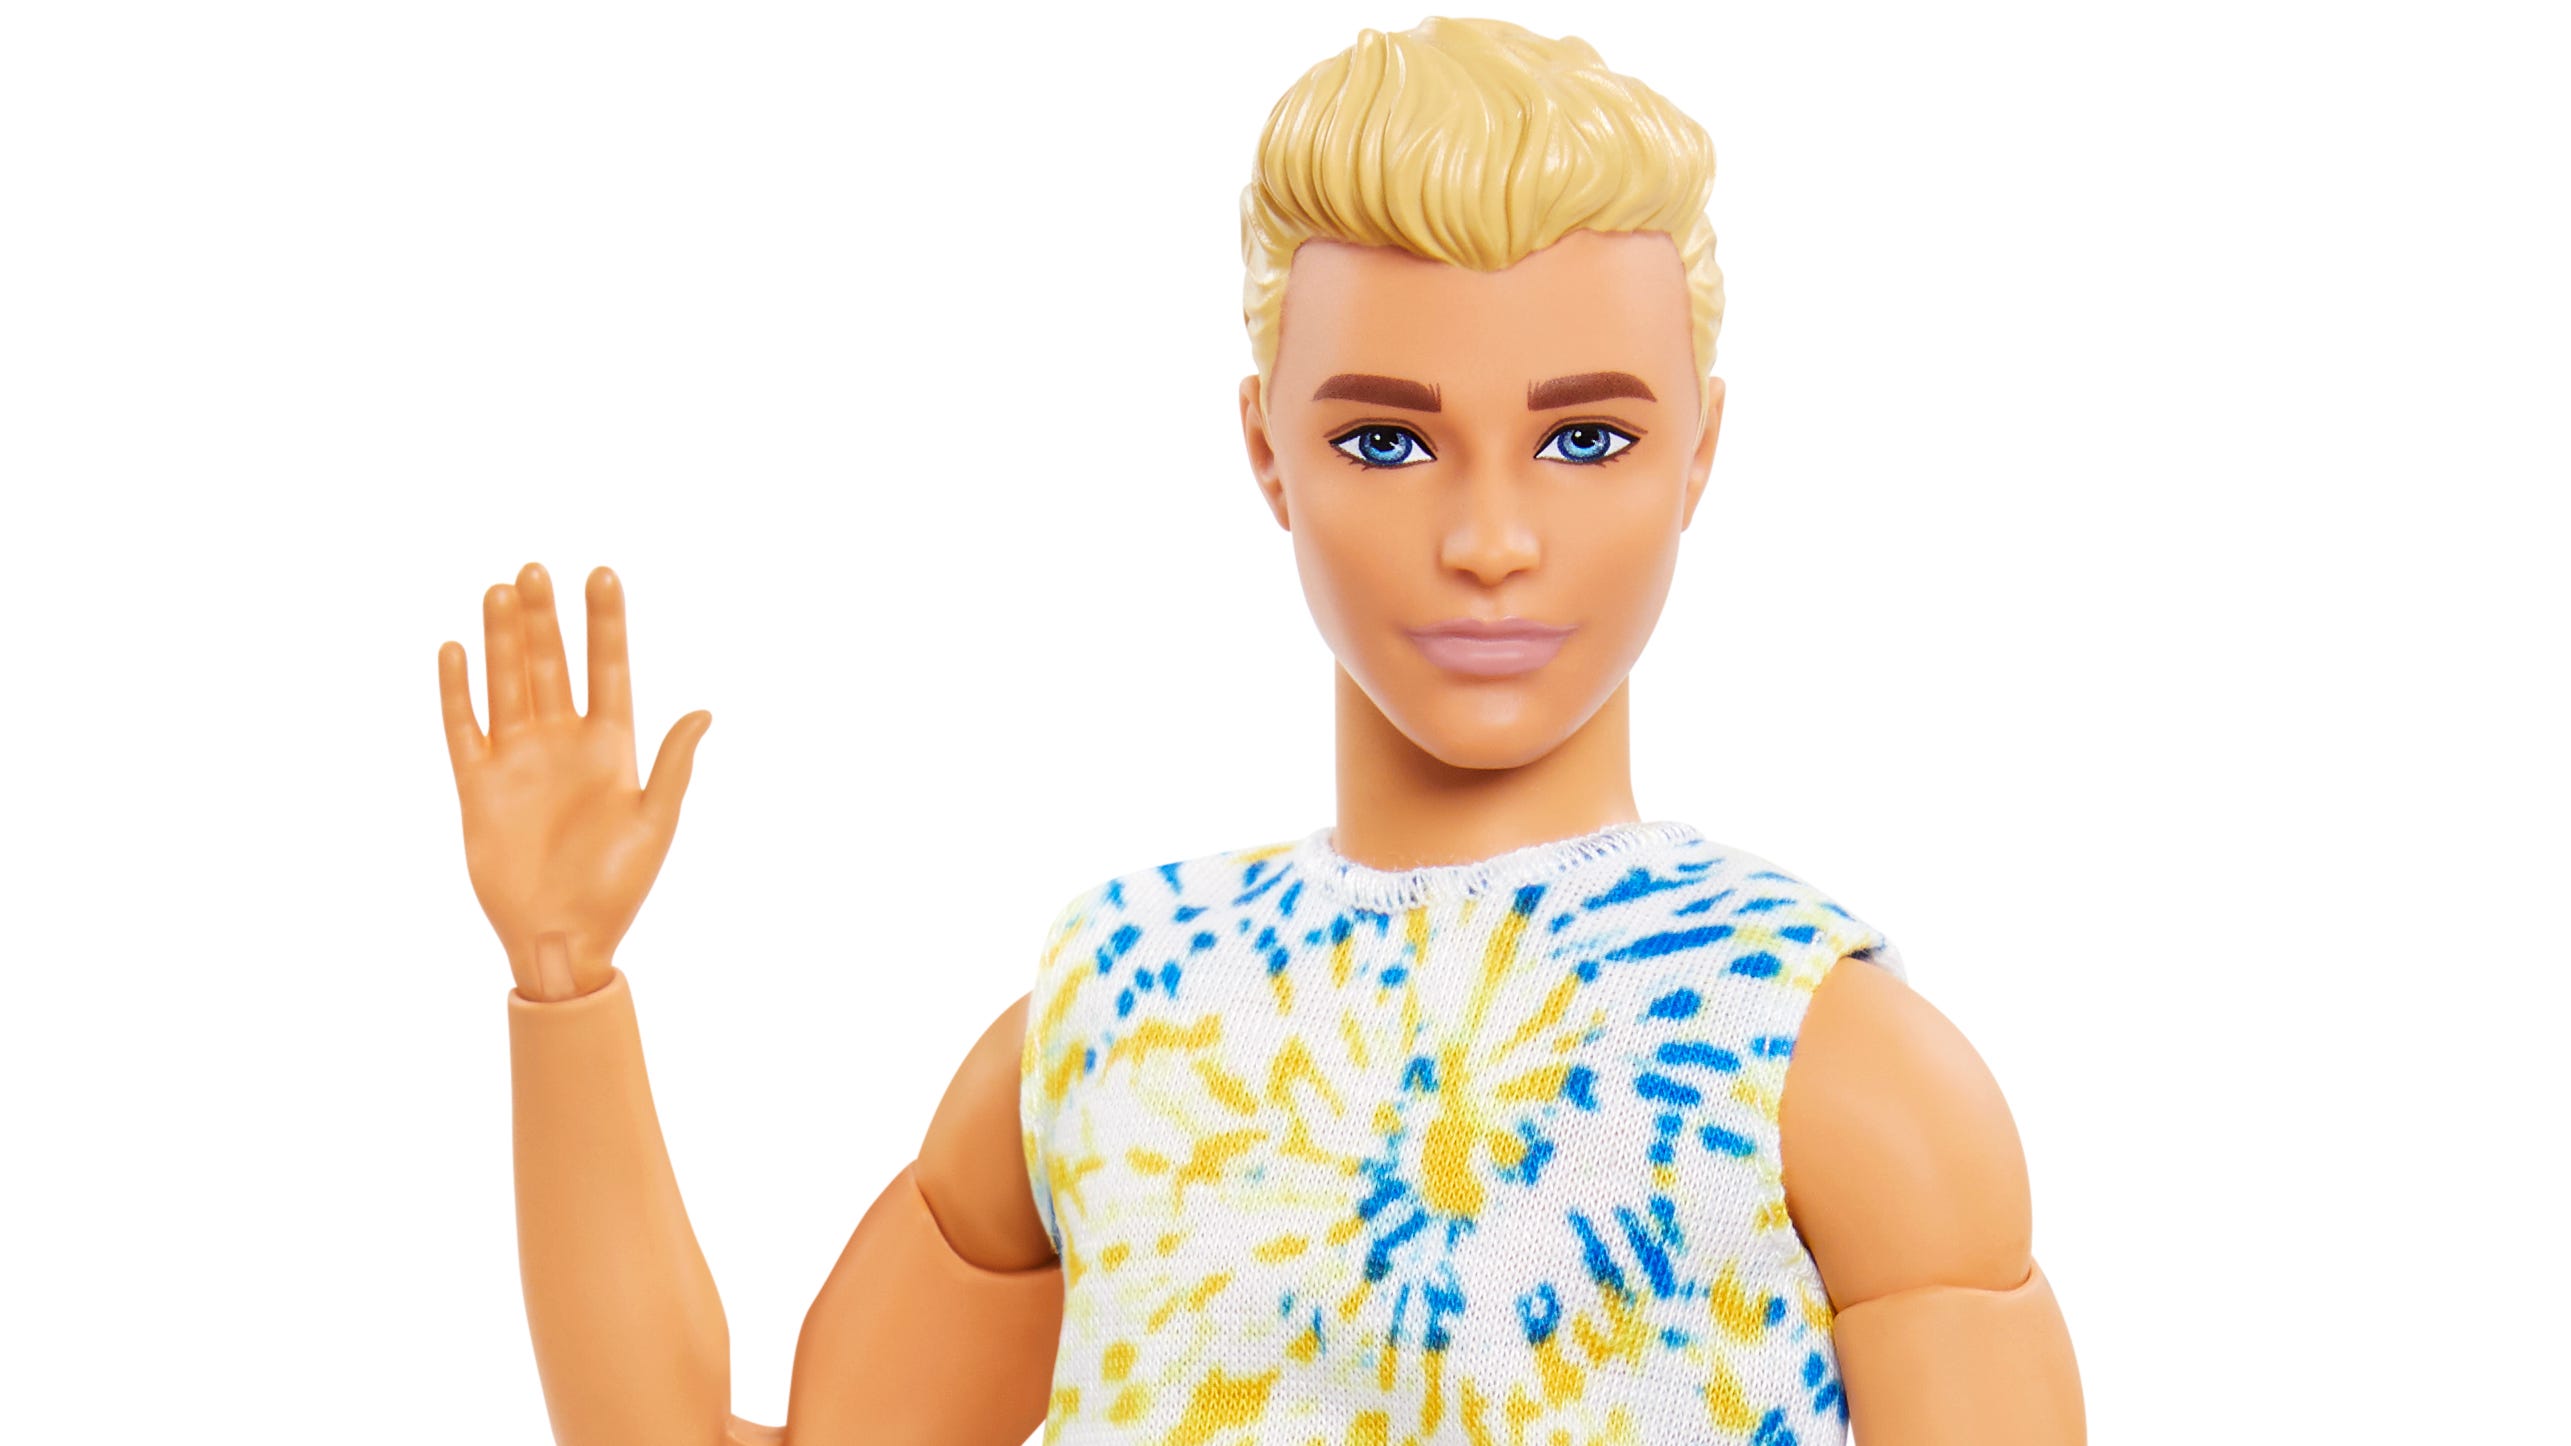 Ingang Ijver Uitwisseling Ken doll turns 60: Barbie counterpart has changed a lot. See how